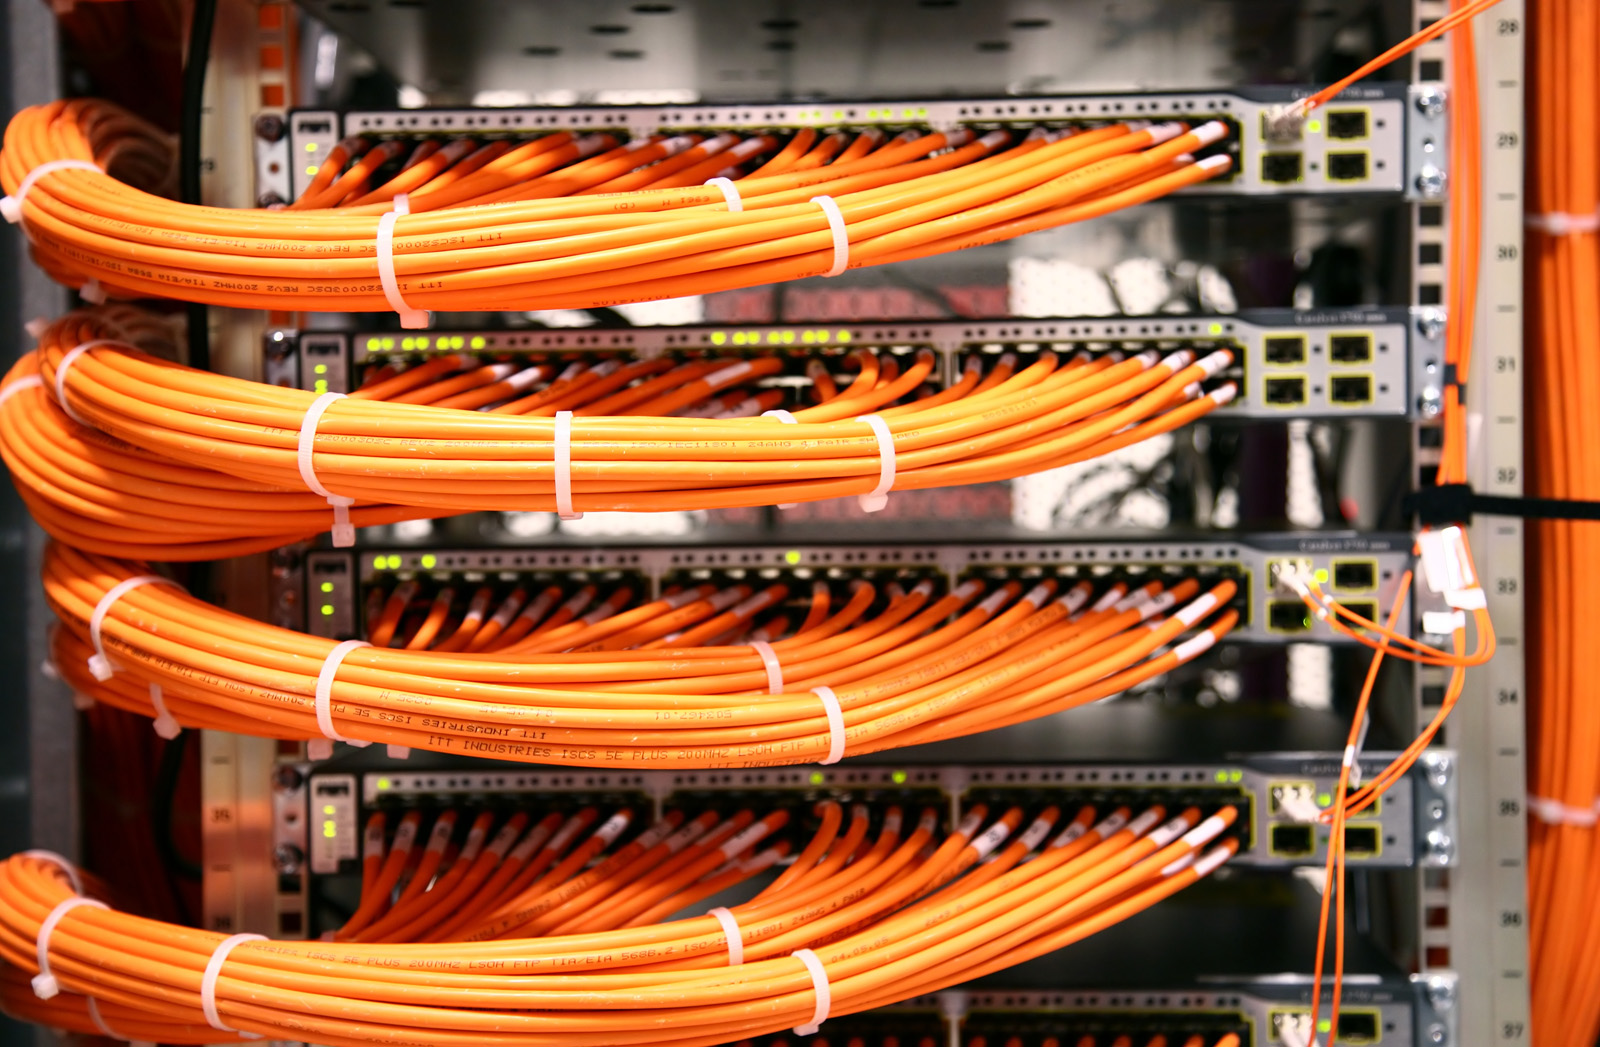 Brodhead Kentucky Superior Voice & Data Network Cabling Services